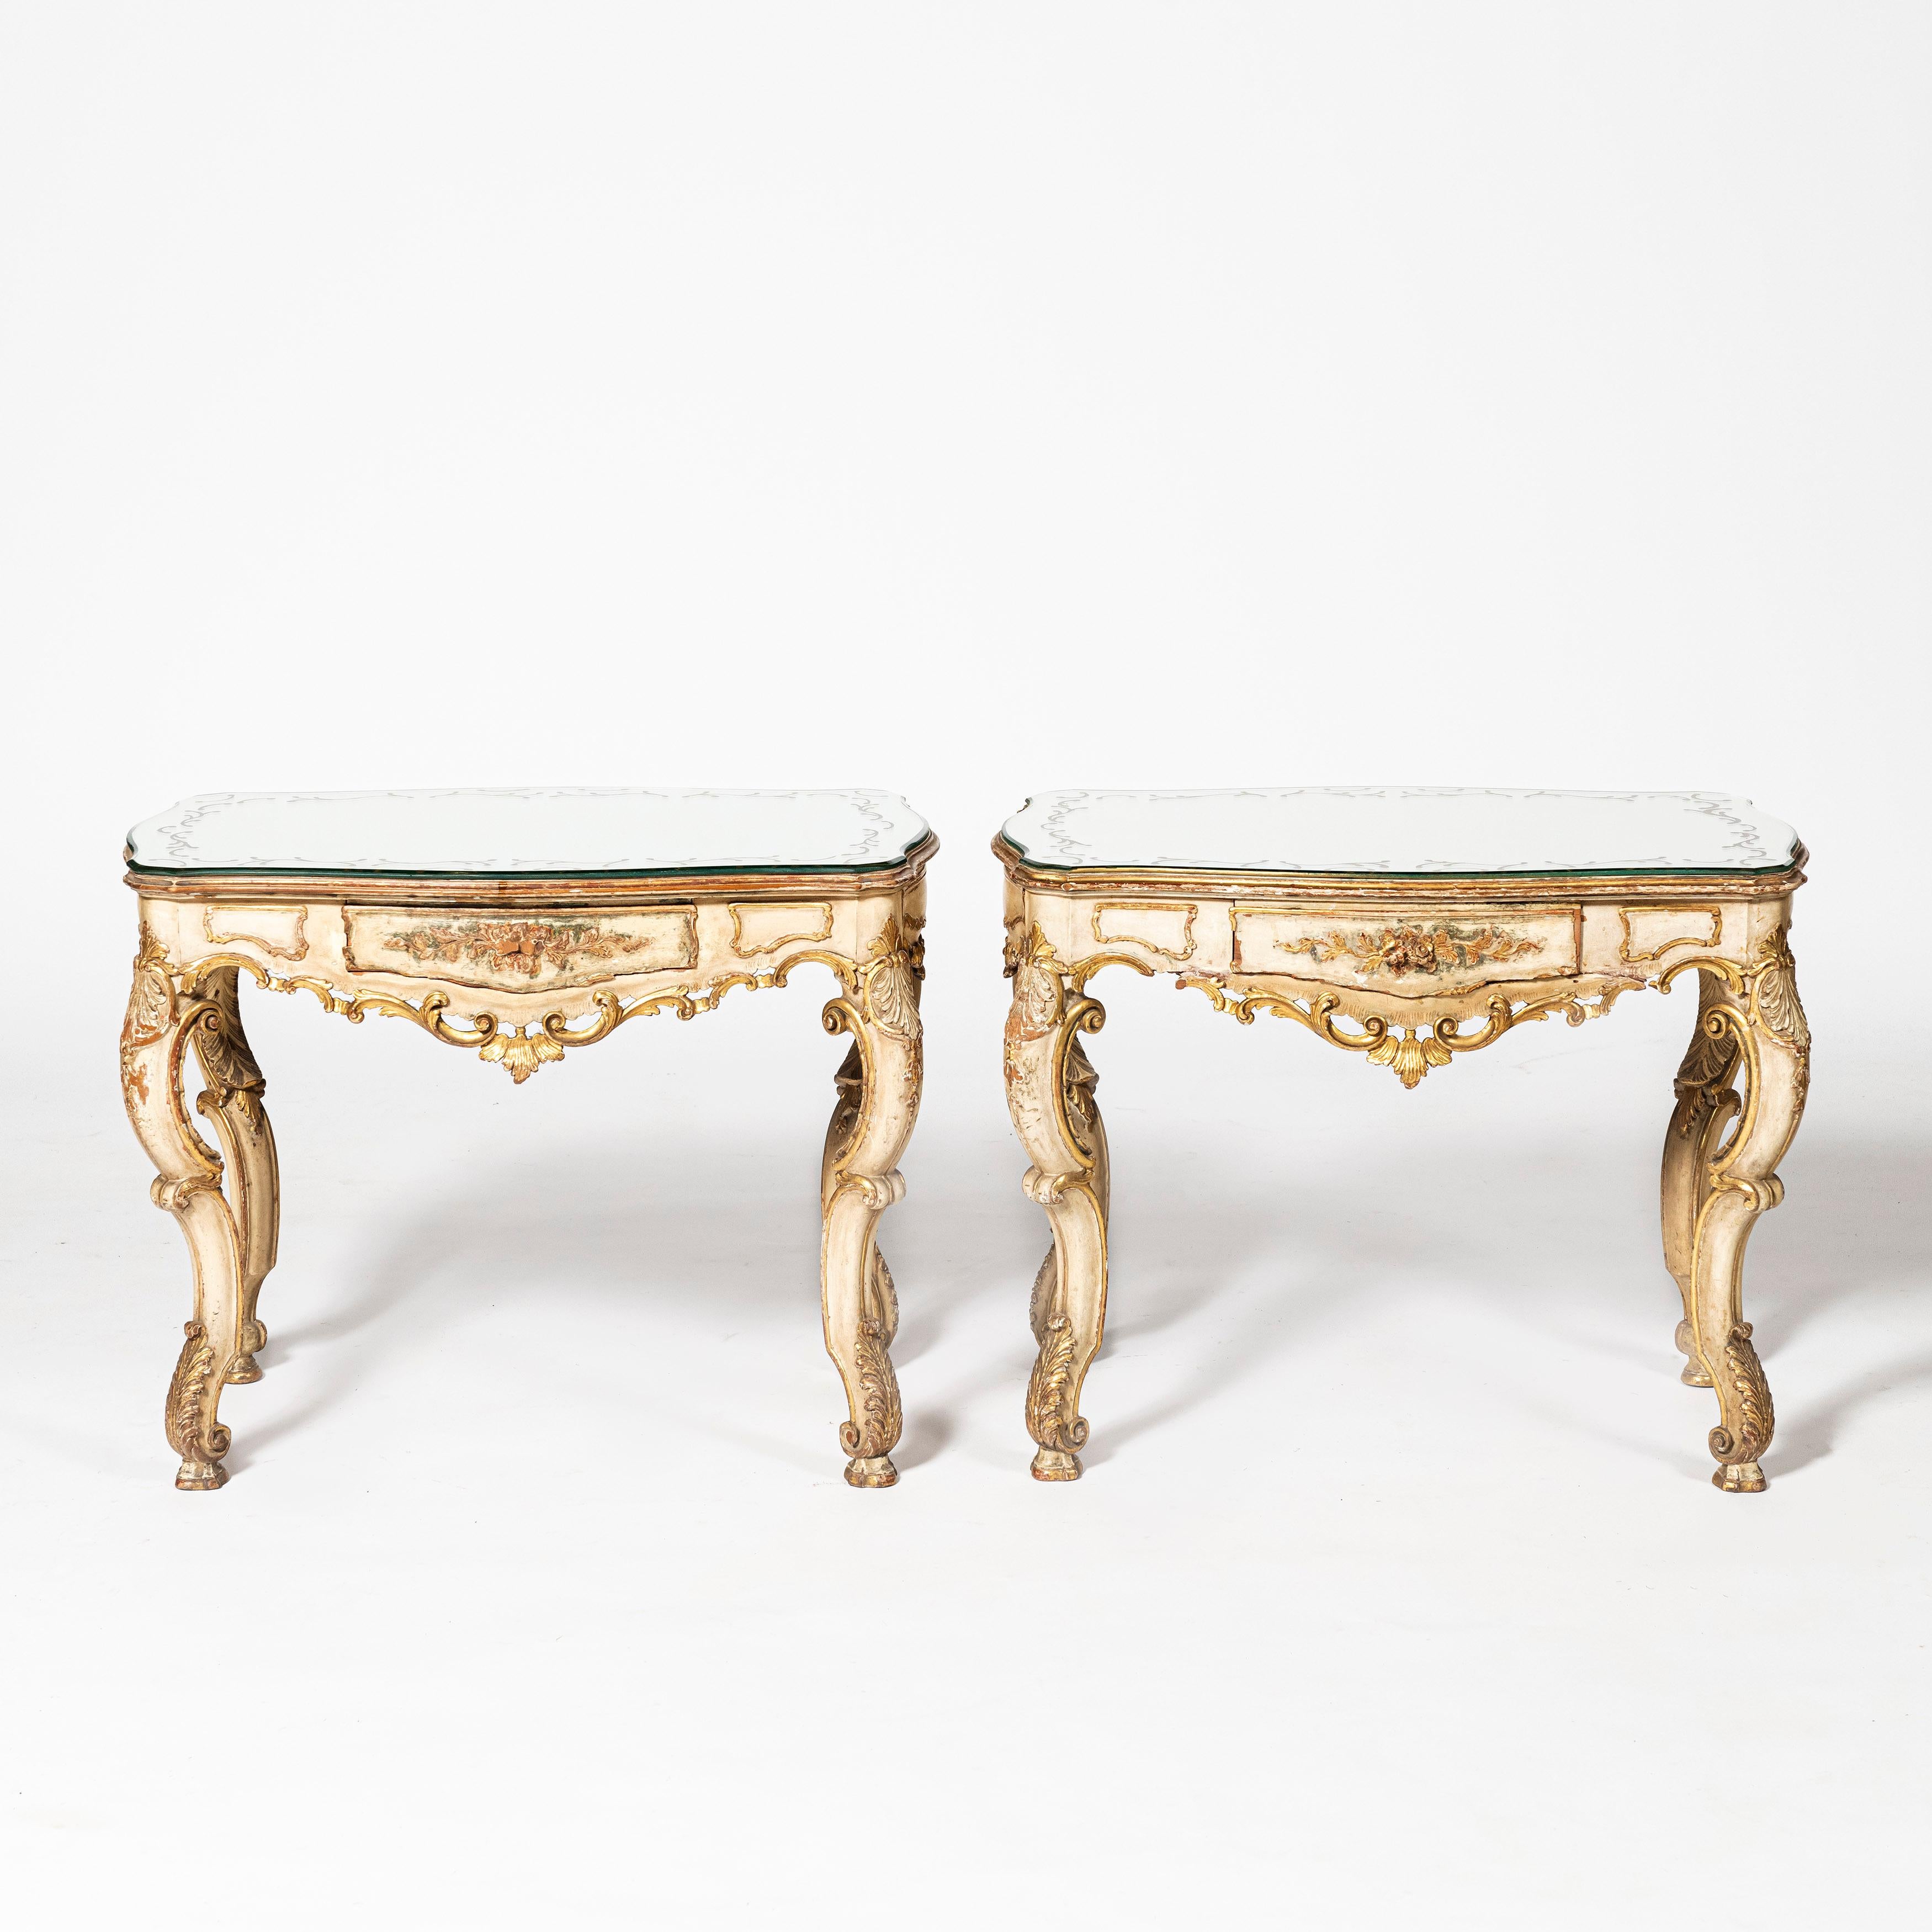 Patinated wood, gold leaf and mirror three piece set of Venetian rococo console table and night stands. Italy, late 19th century.

Console dimensions: 81 cm height, 97 cm width, 32 cm depth.
Nightstands dimensions: 49 cm height, 64 cm width, 39